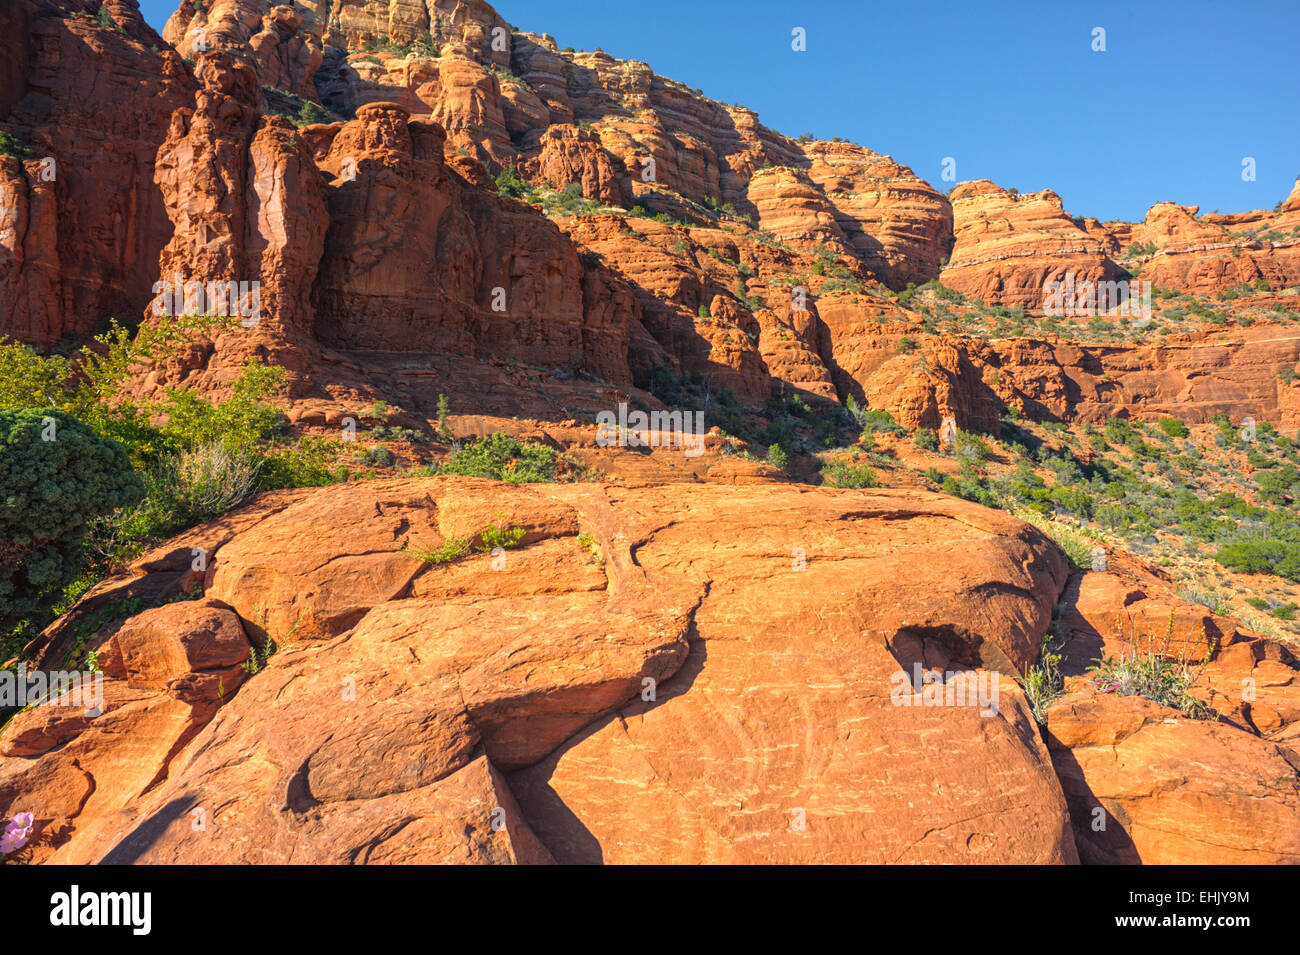 Colorful red rock buttes boulders turned orange from the Sedona Arizona near Chapel of the Holy Cross. American southwest Stock Photo - Alamy